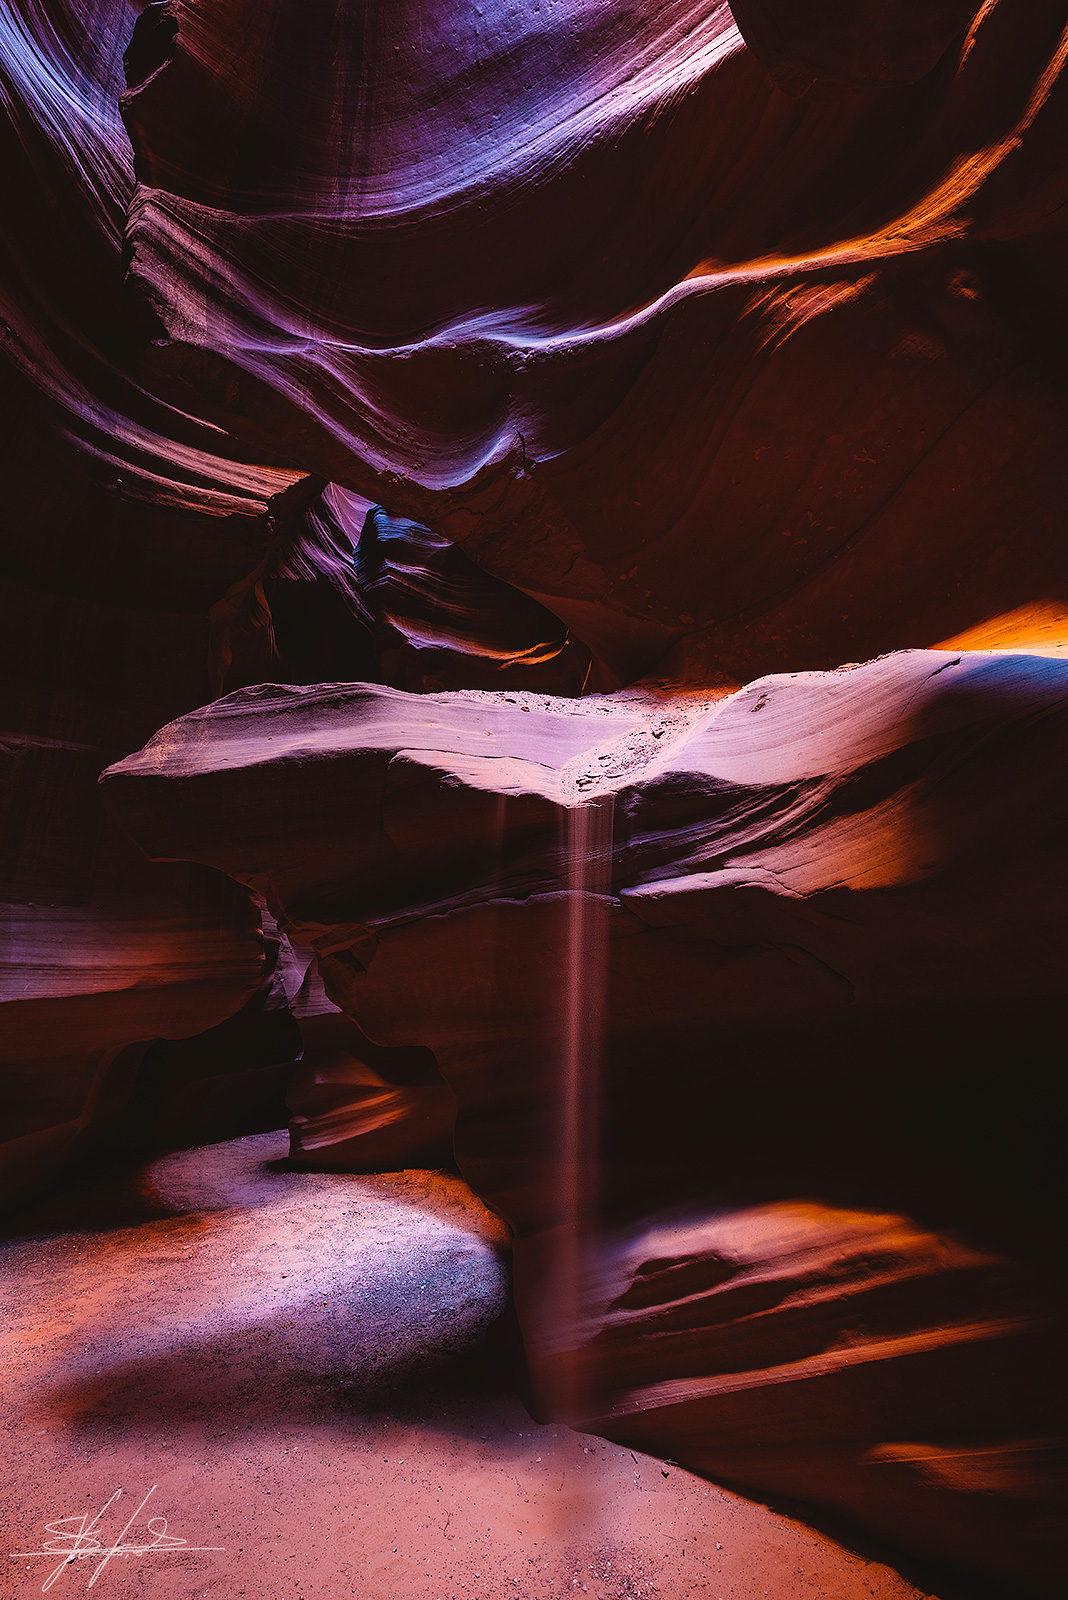 The Sands of Time (Antelope Canyon)